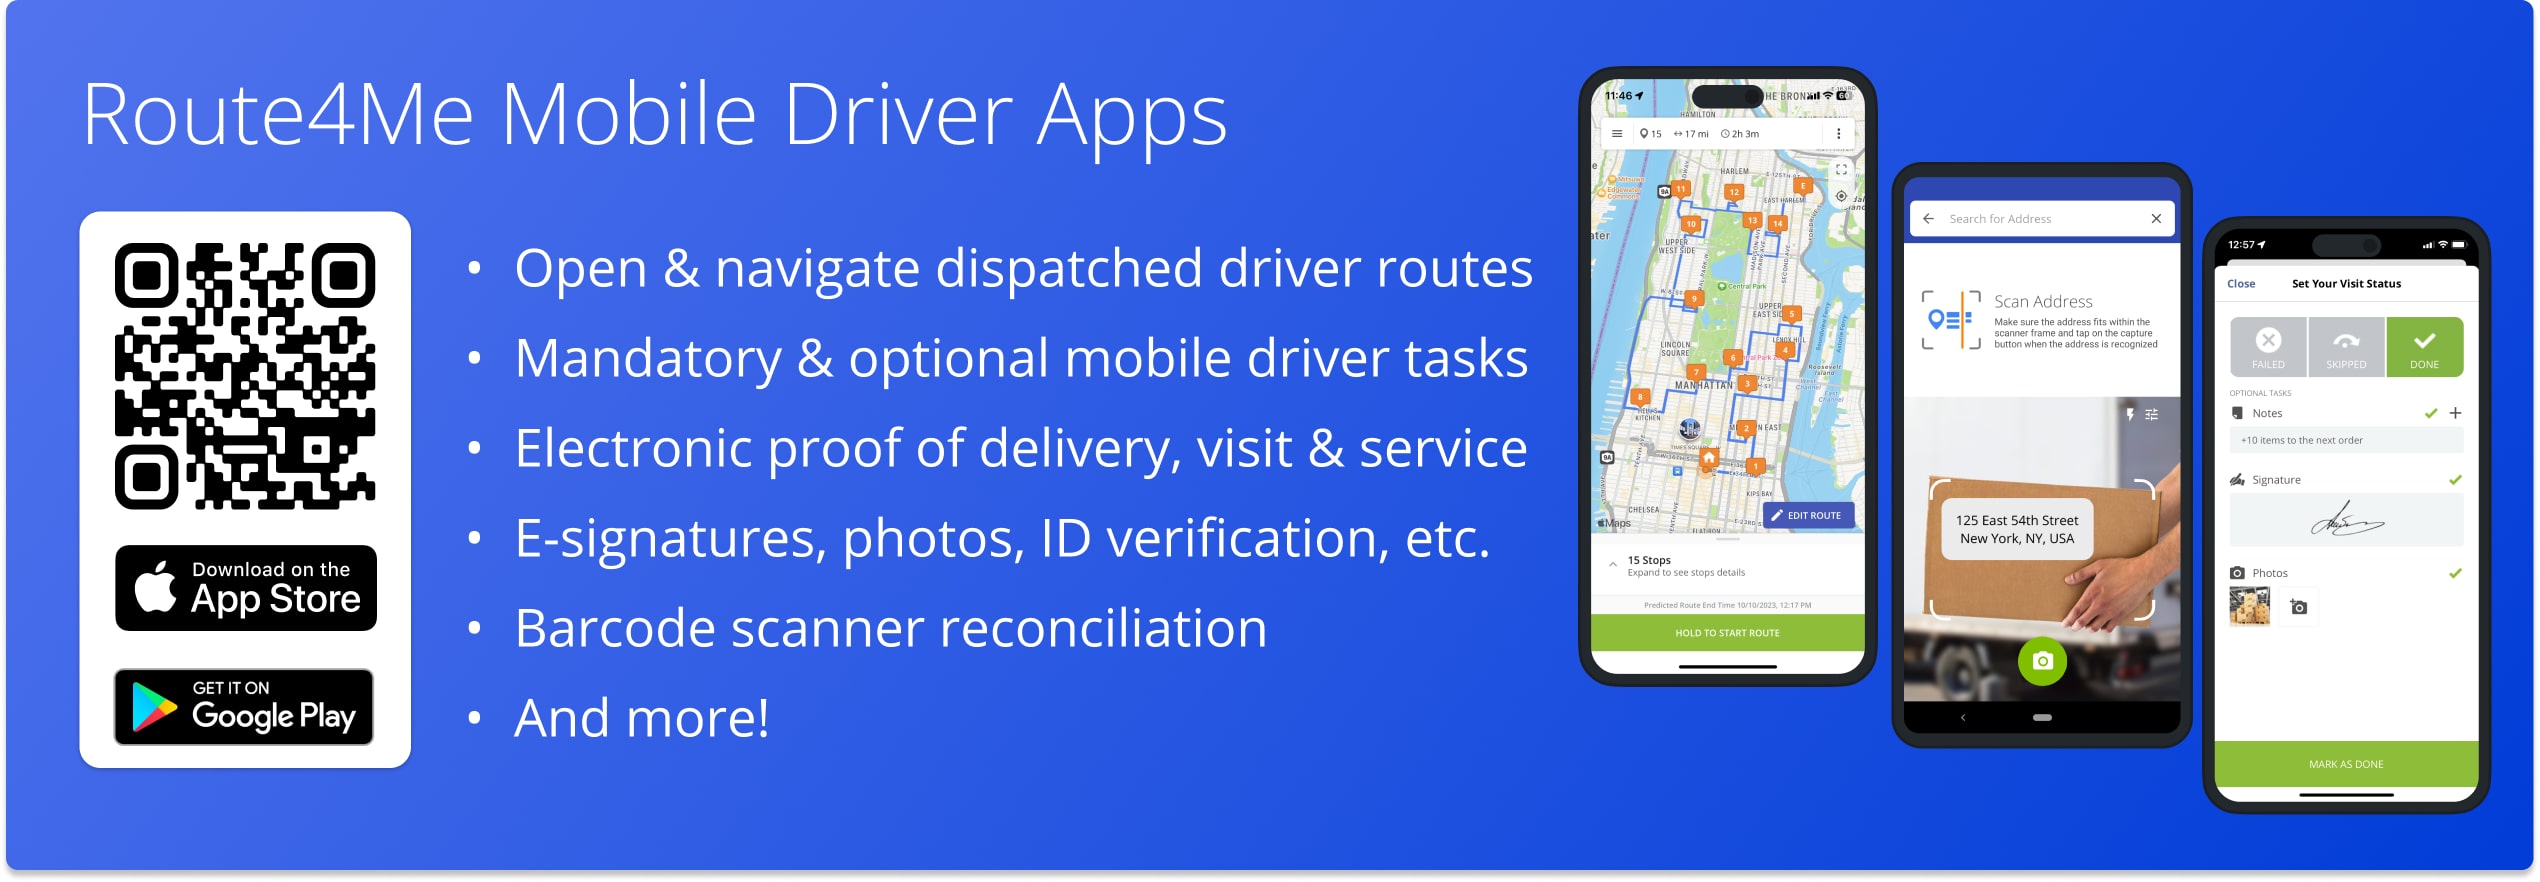 Route4Me Mobile Driver Apps: Open dispatched and scheduled routes, drive routes with in-app GPS navigation, complete driver tasks, collect proof of visit, and finish routes.